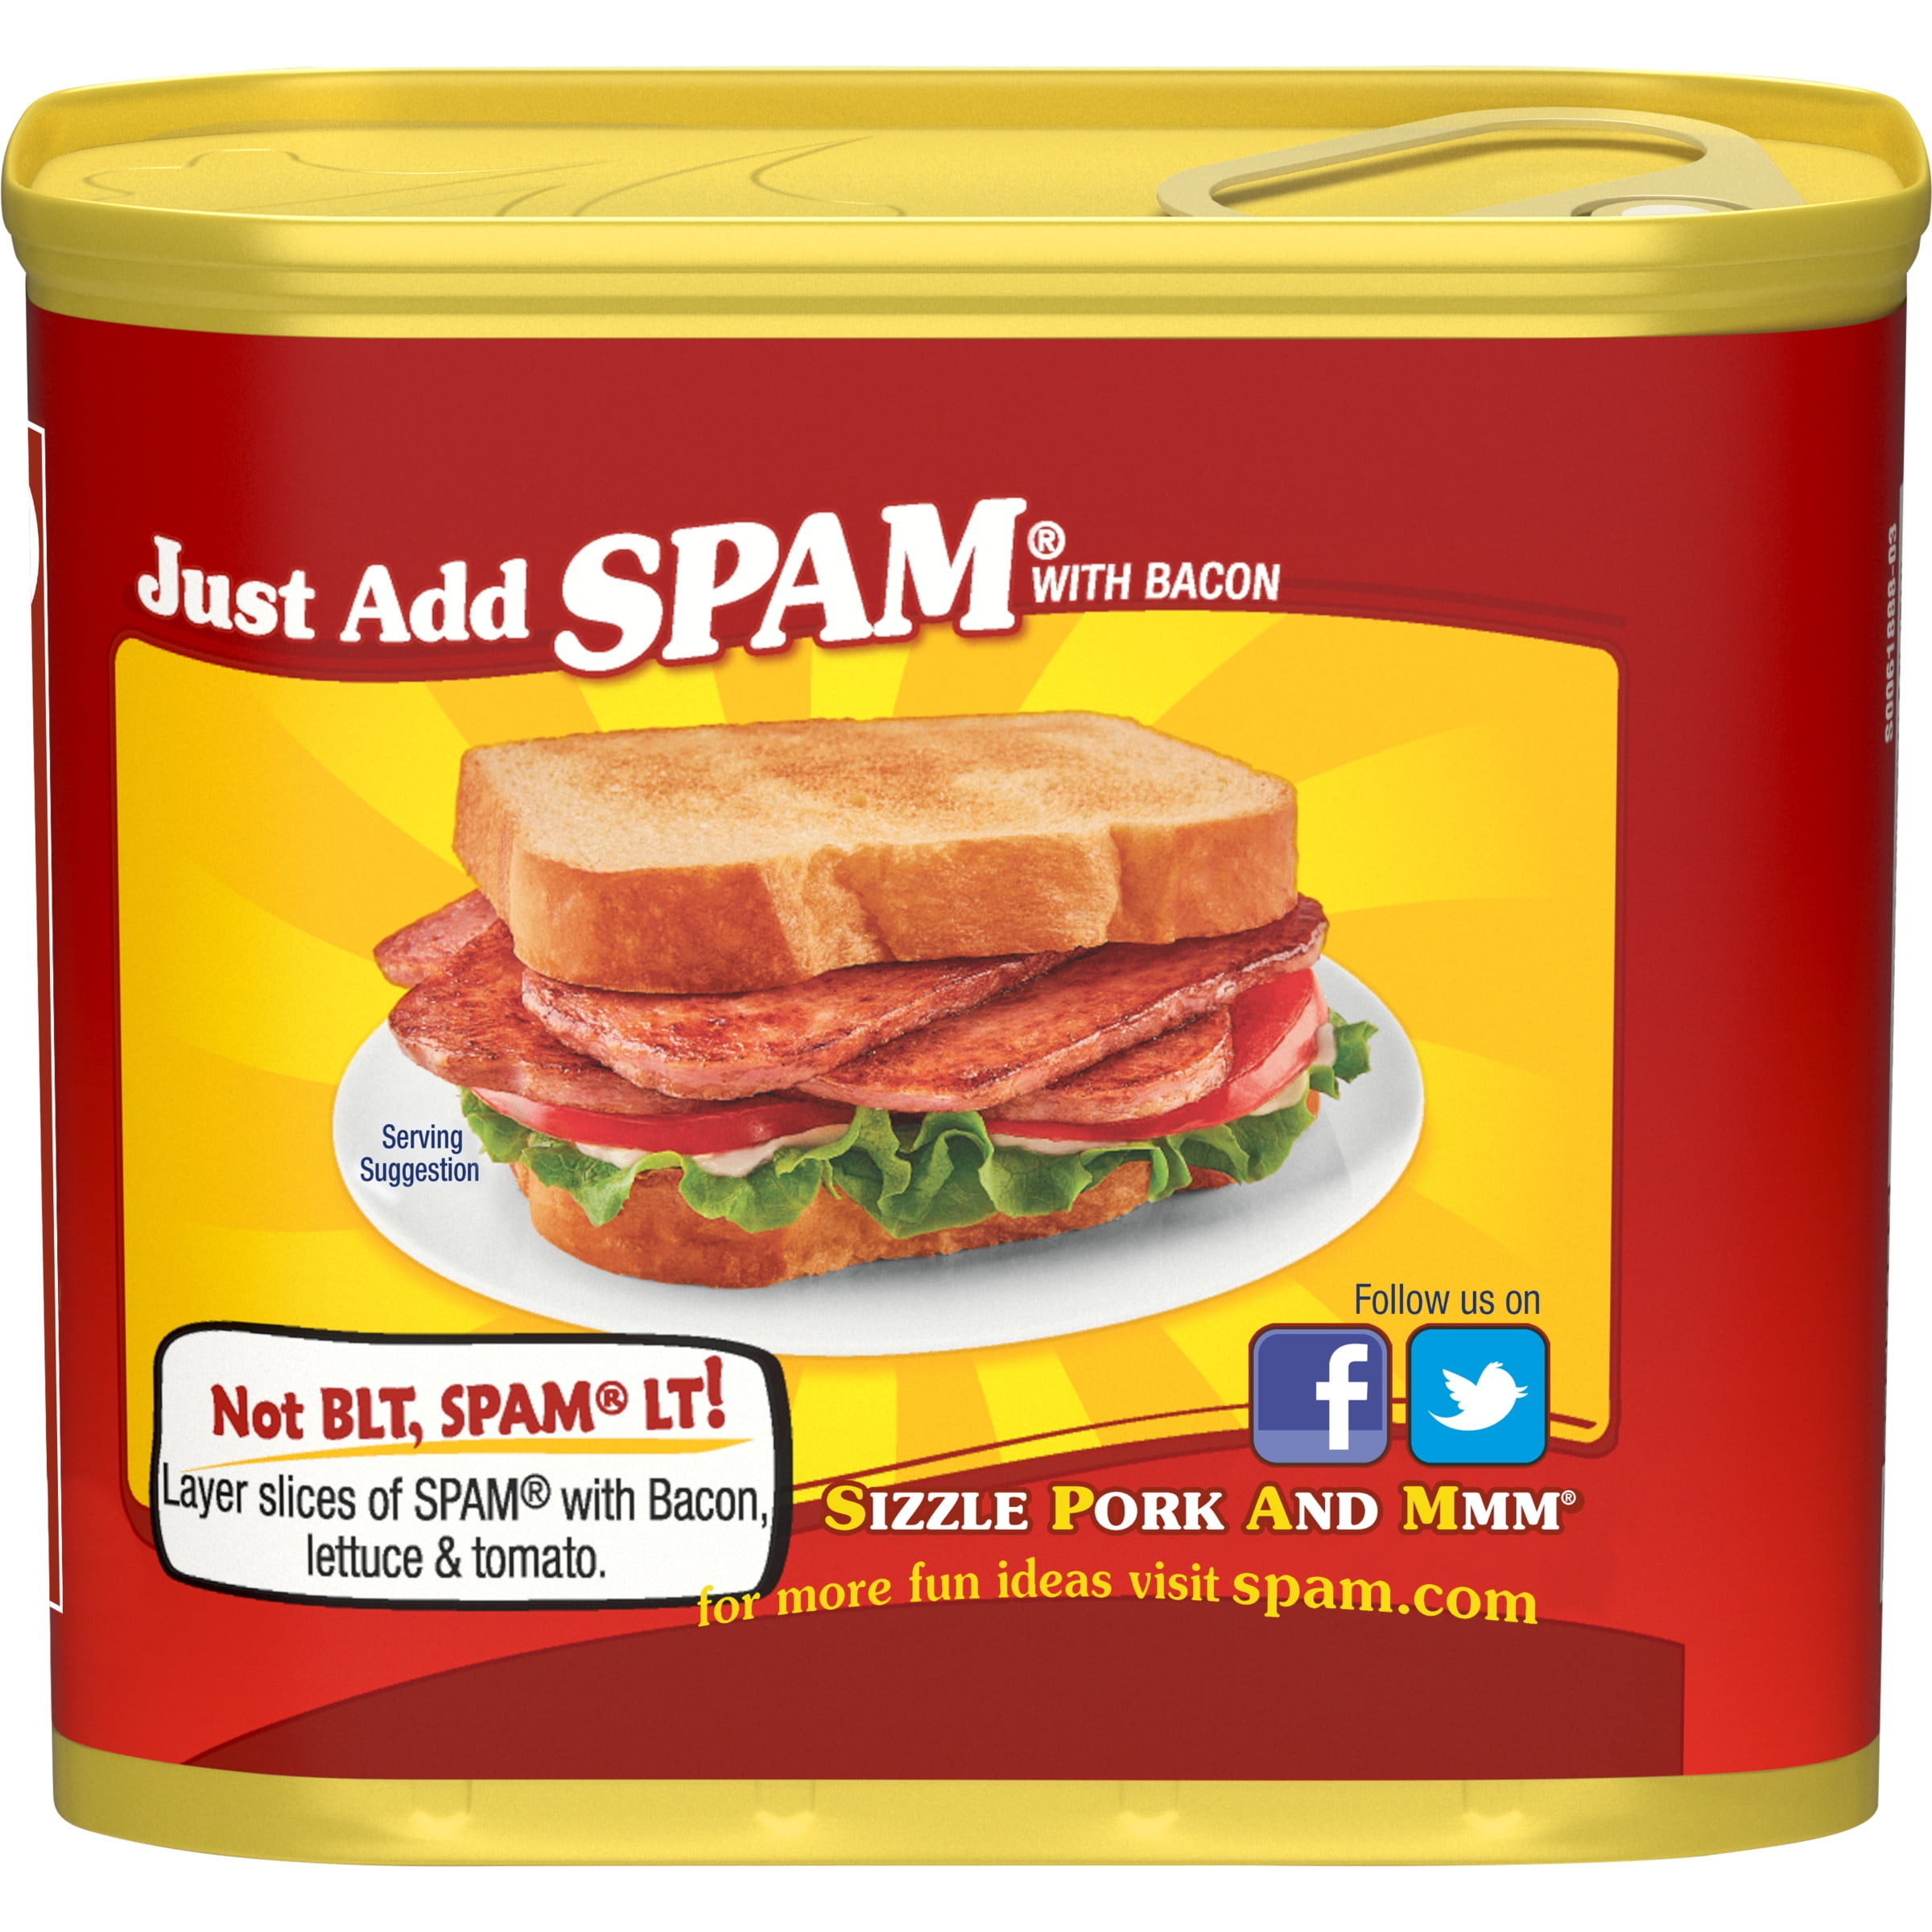 Spam Variety 4 Pack, 1- Original, 1-Hot and Spicy, 1-Bacon, 1-Hickory Smoke  with 1-Magnetic Notepad